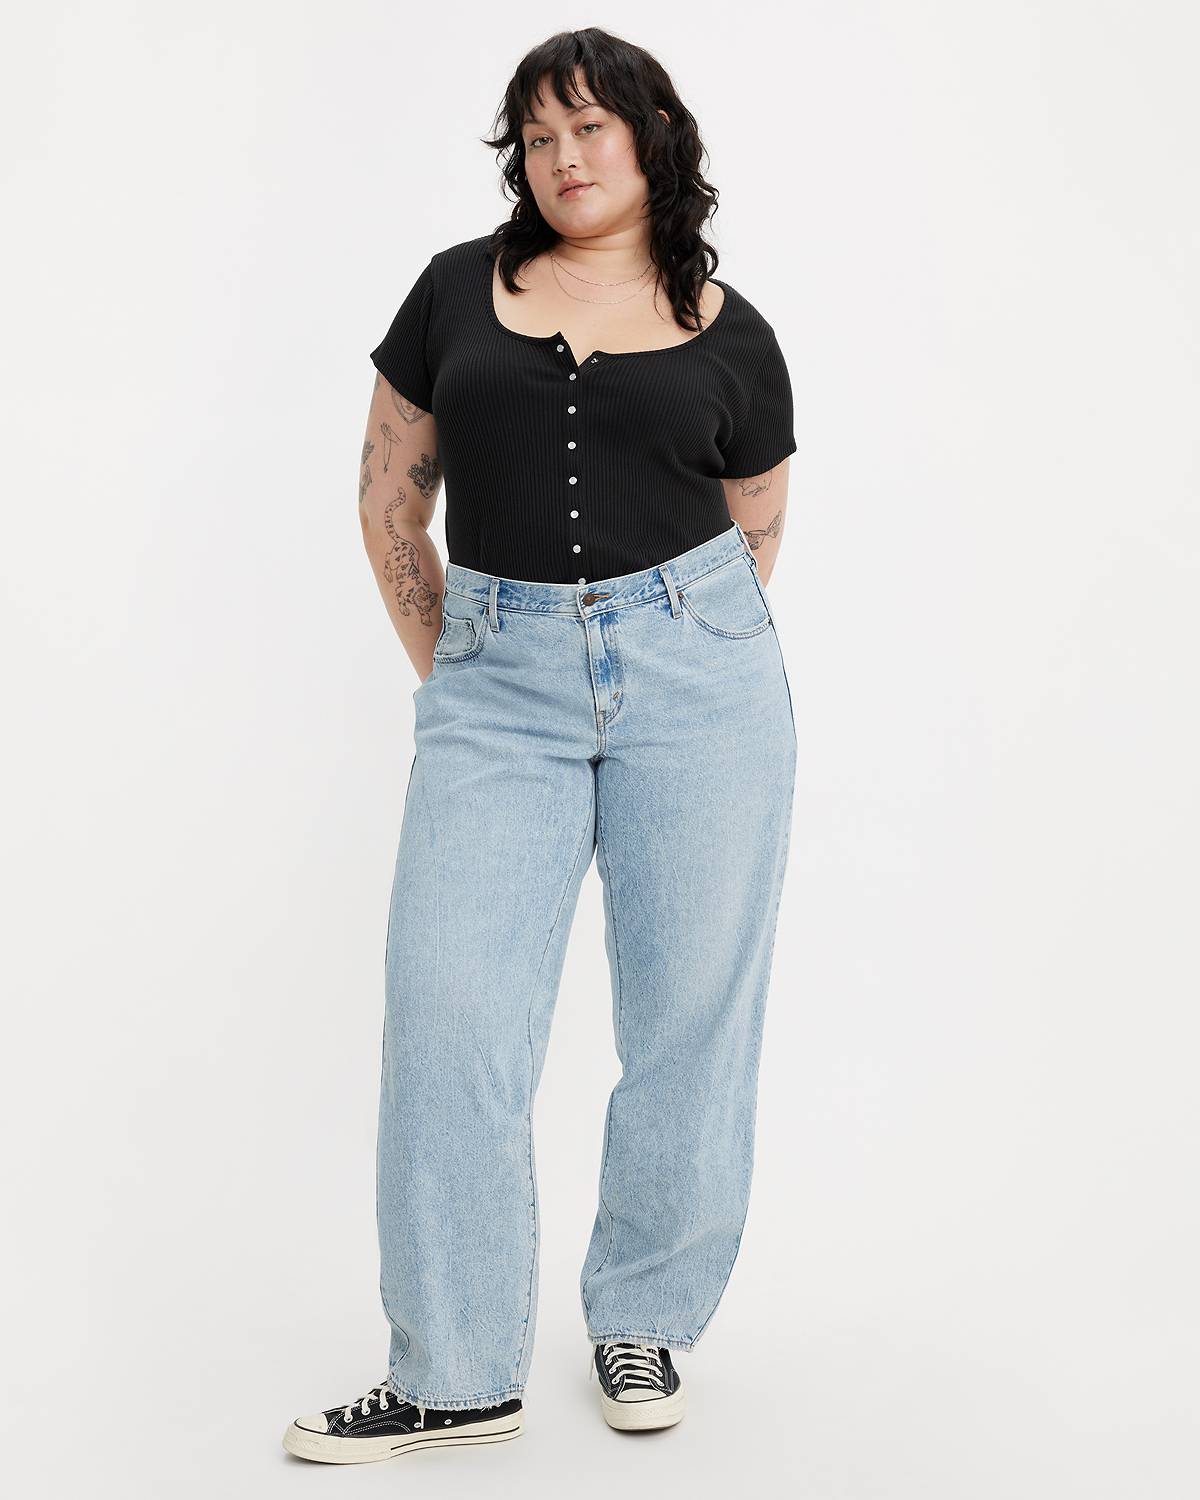 jeans pants with a black top.